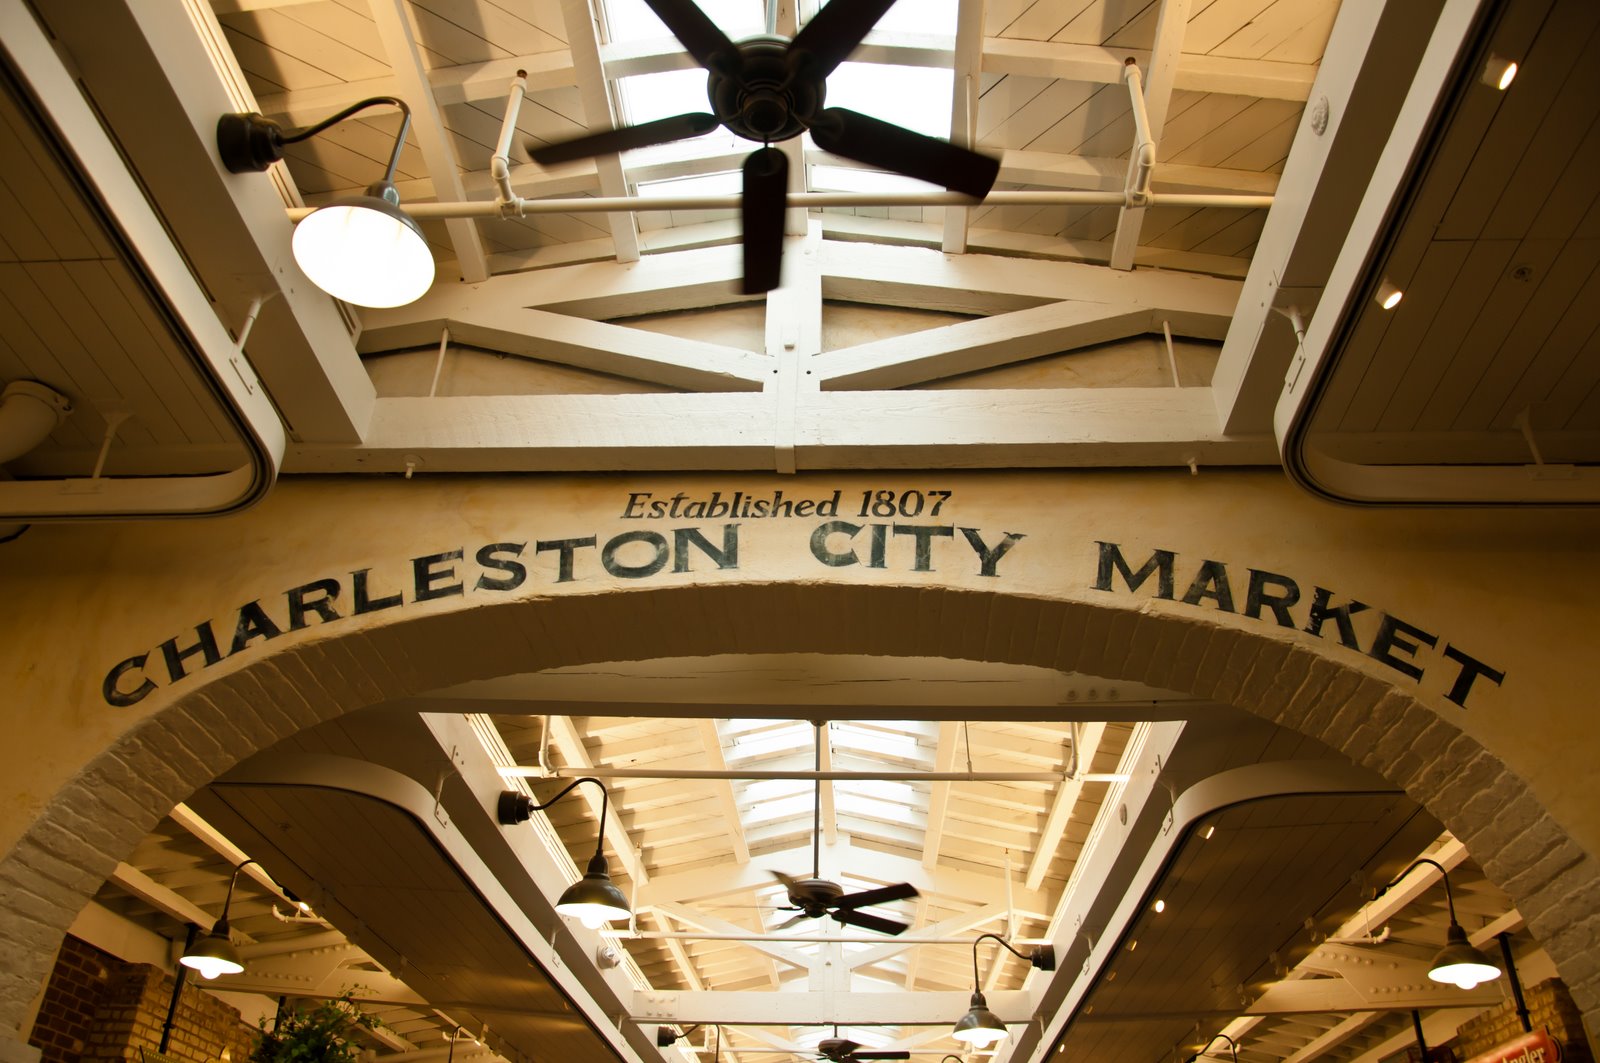 All About Us: Charleston City Market